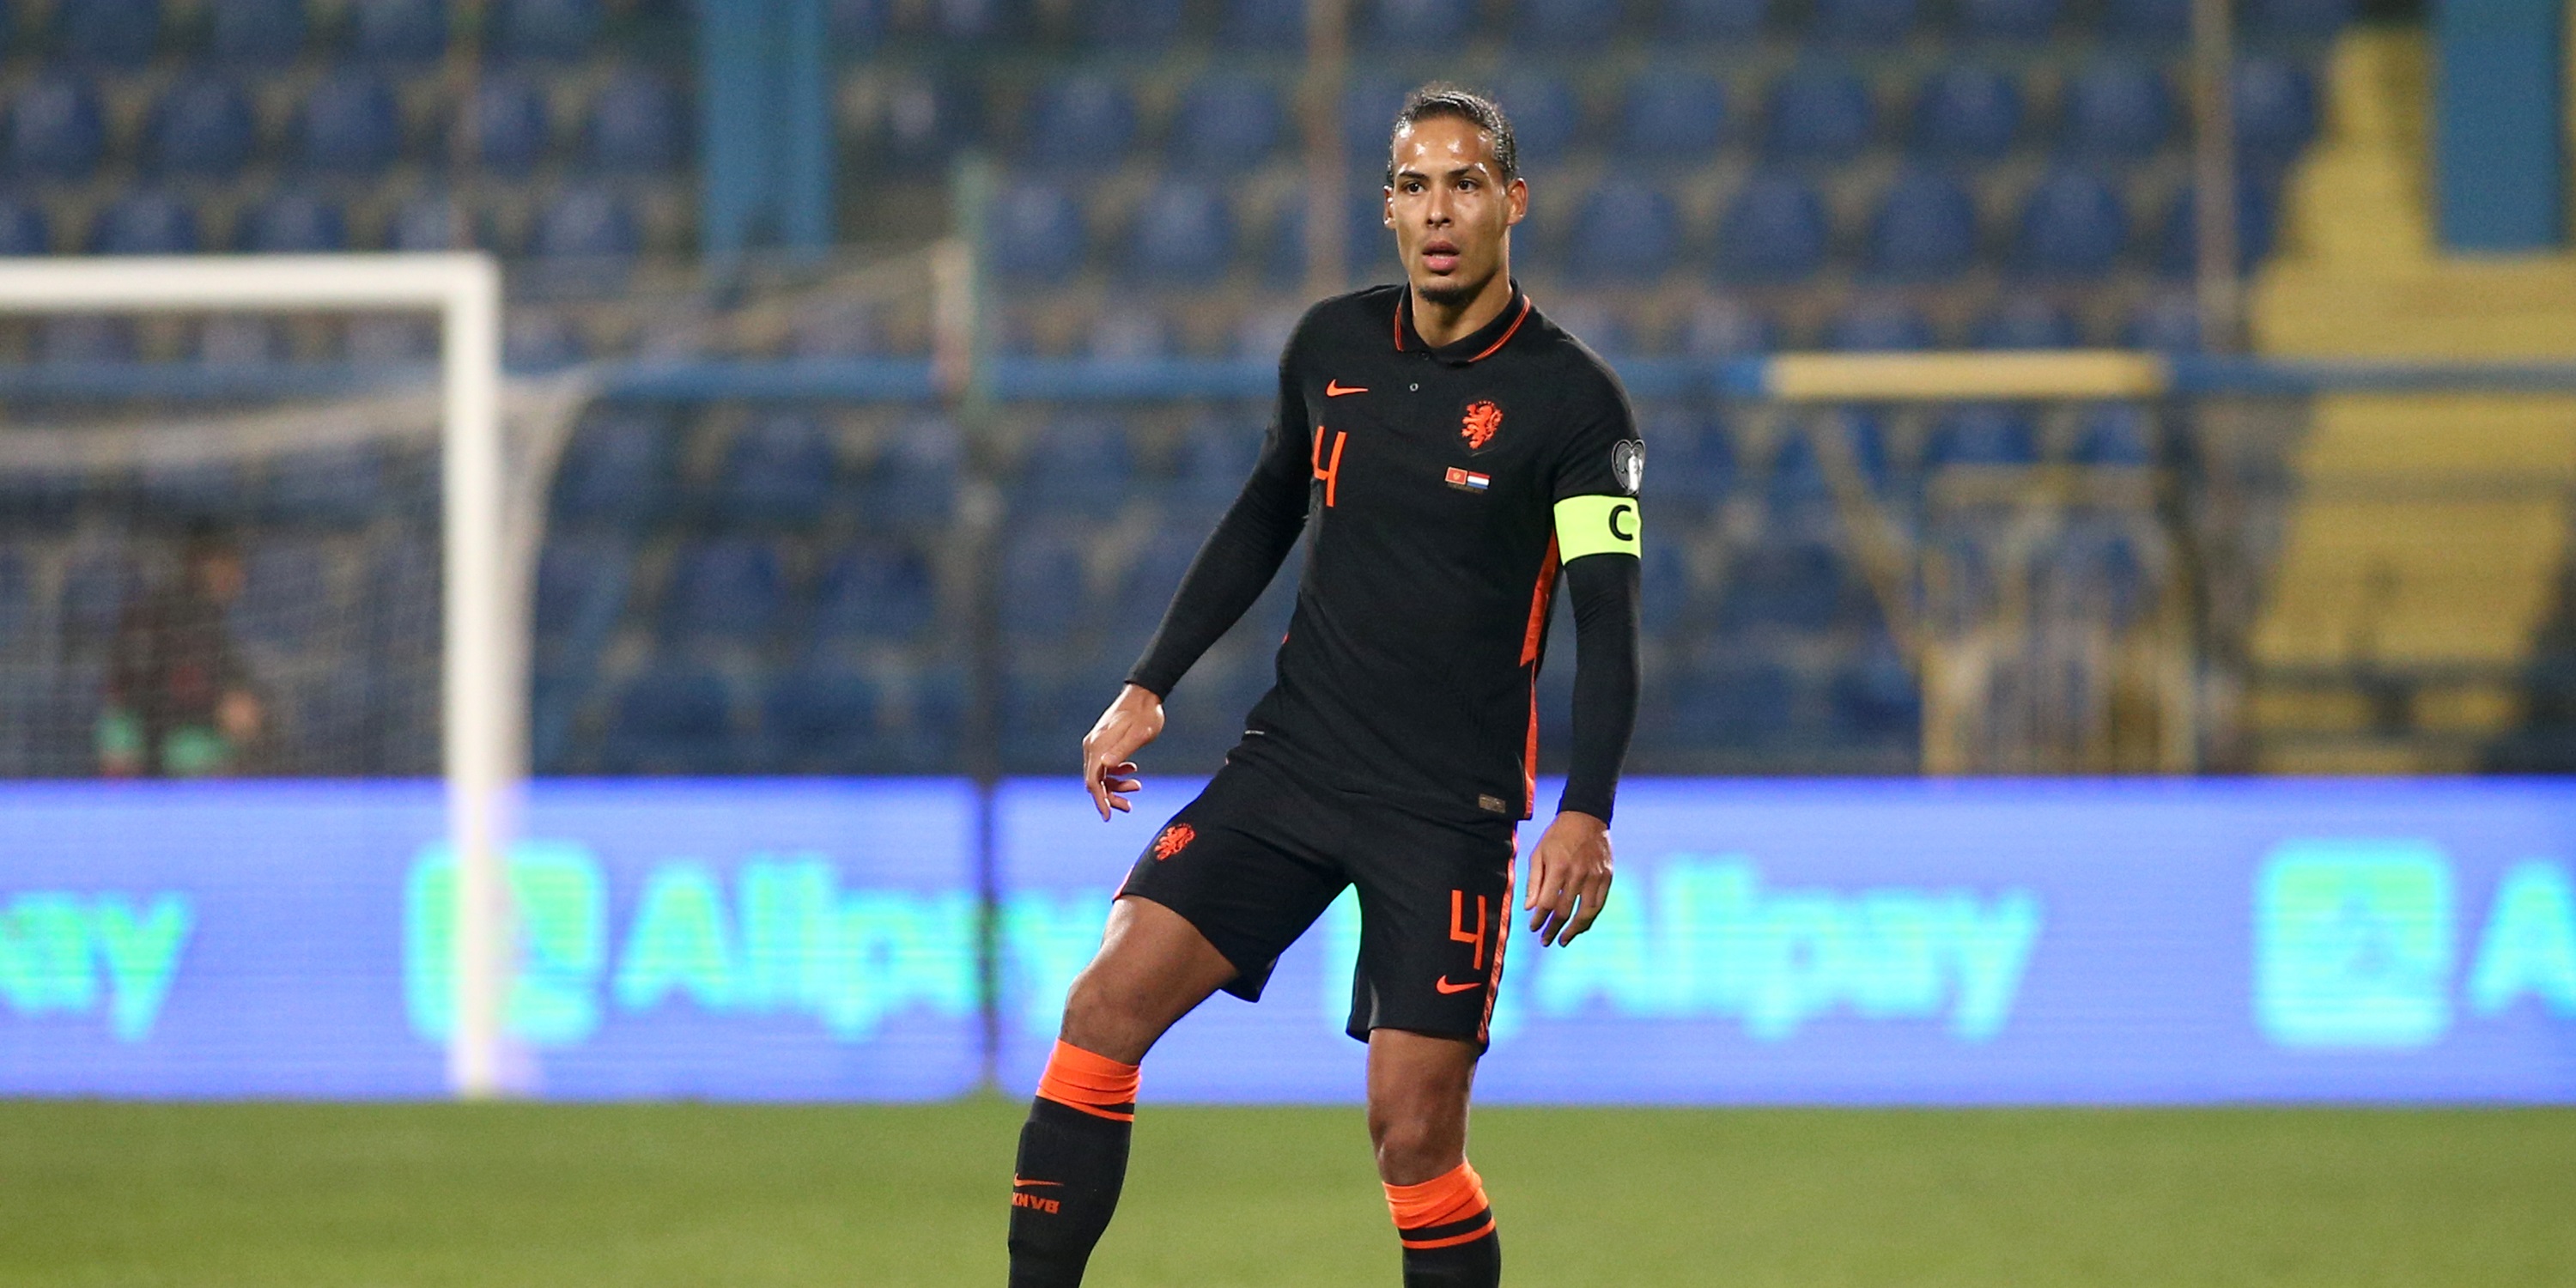 ‘It hurts when someone touches it’ – Van Dijk reveals extent of recovery from ‘very painful’ incident involving Erling Haaland